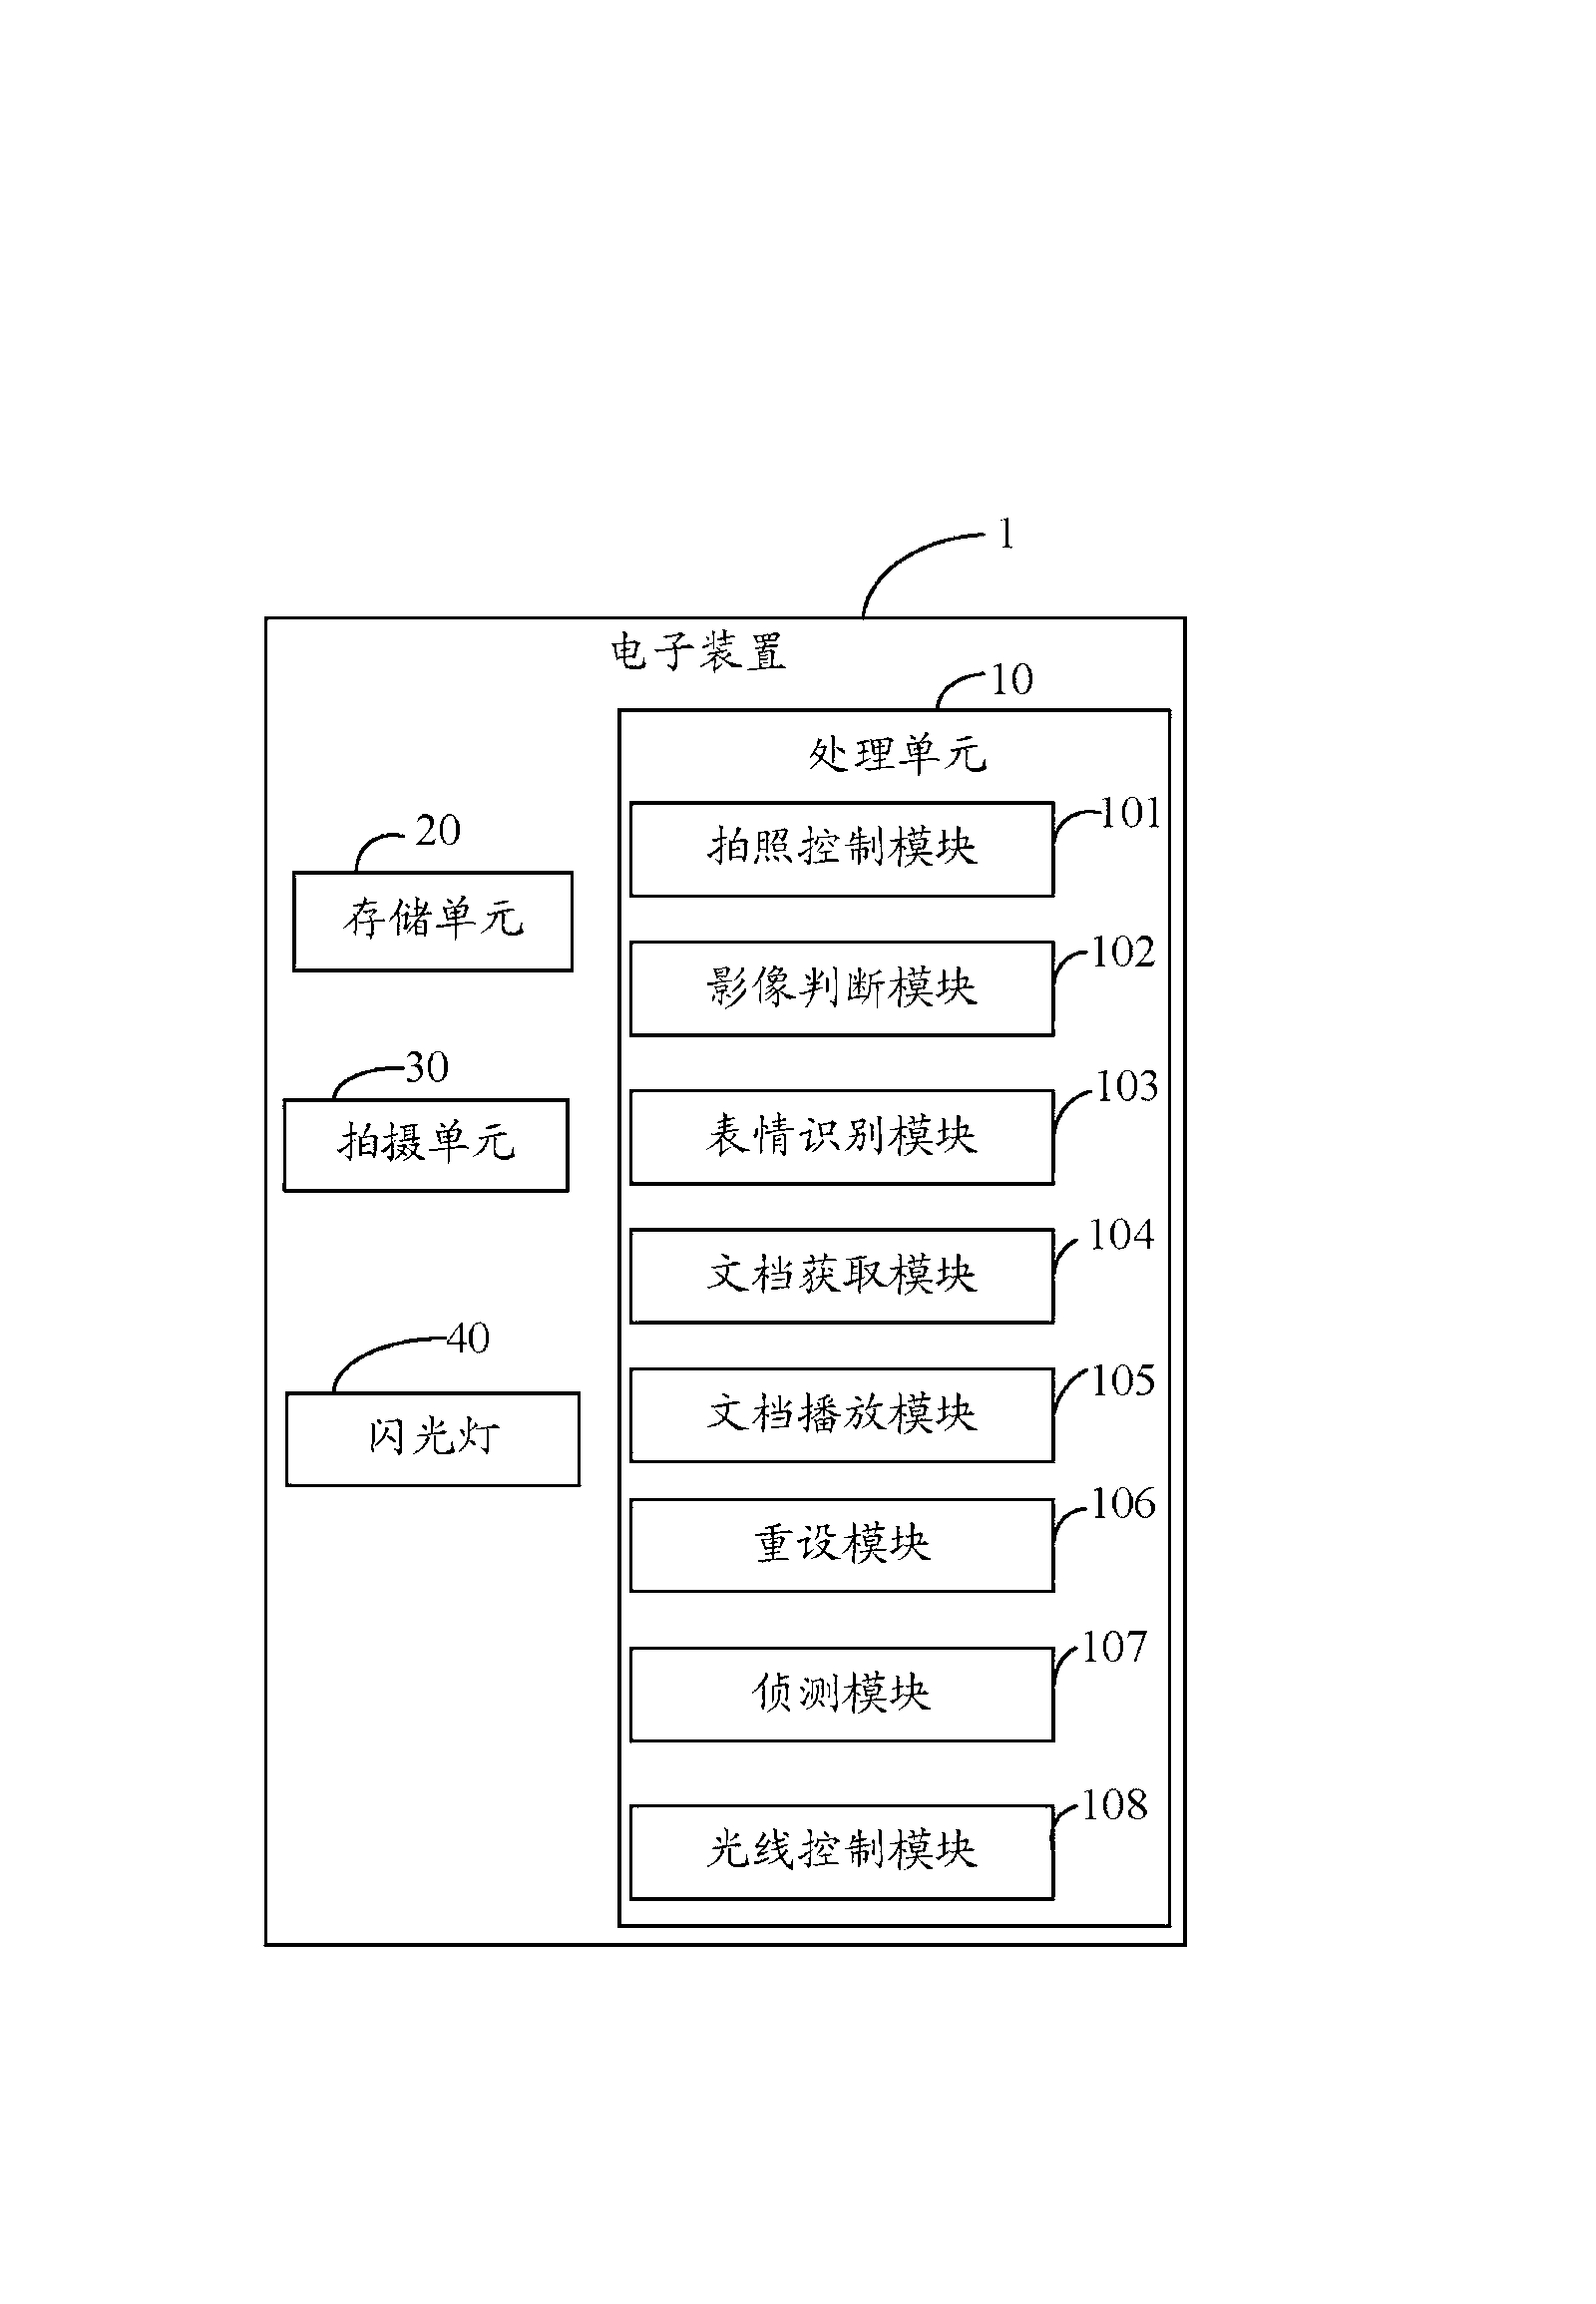 Electronic device and method for playing documents based on facial expressions